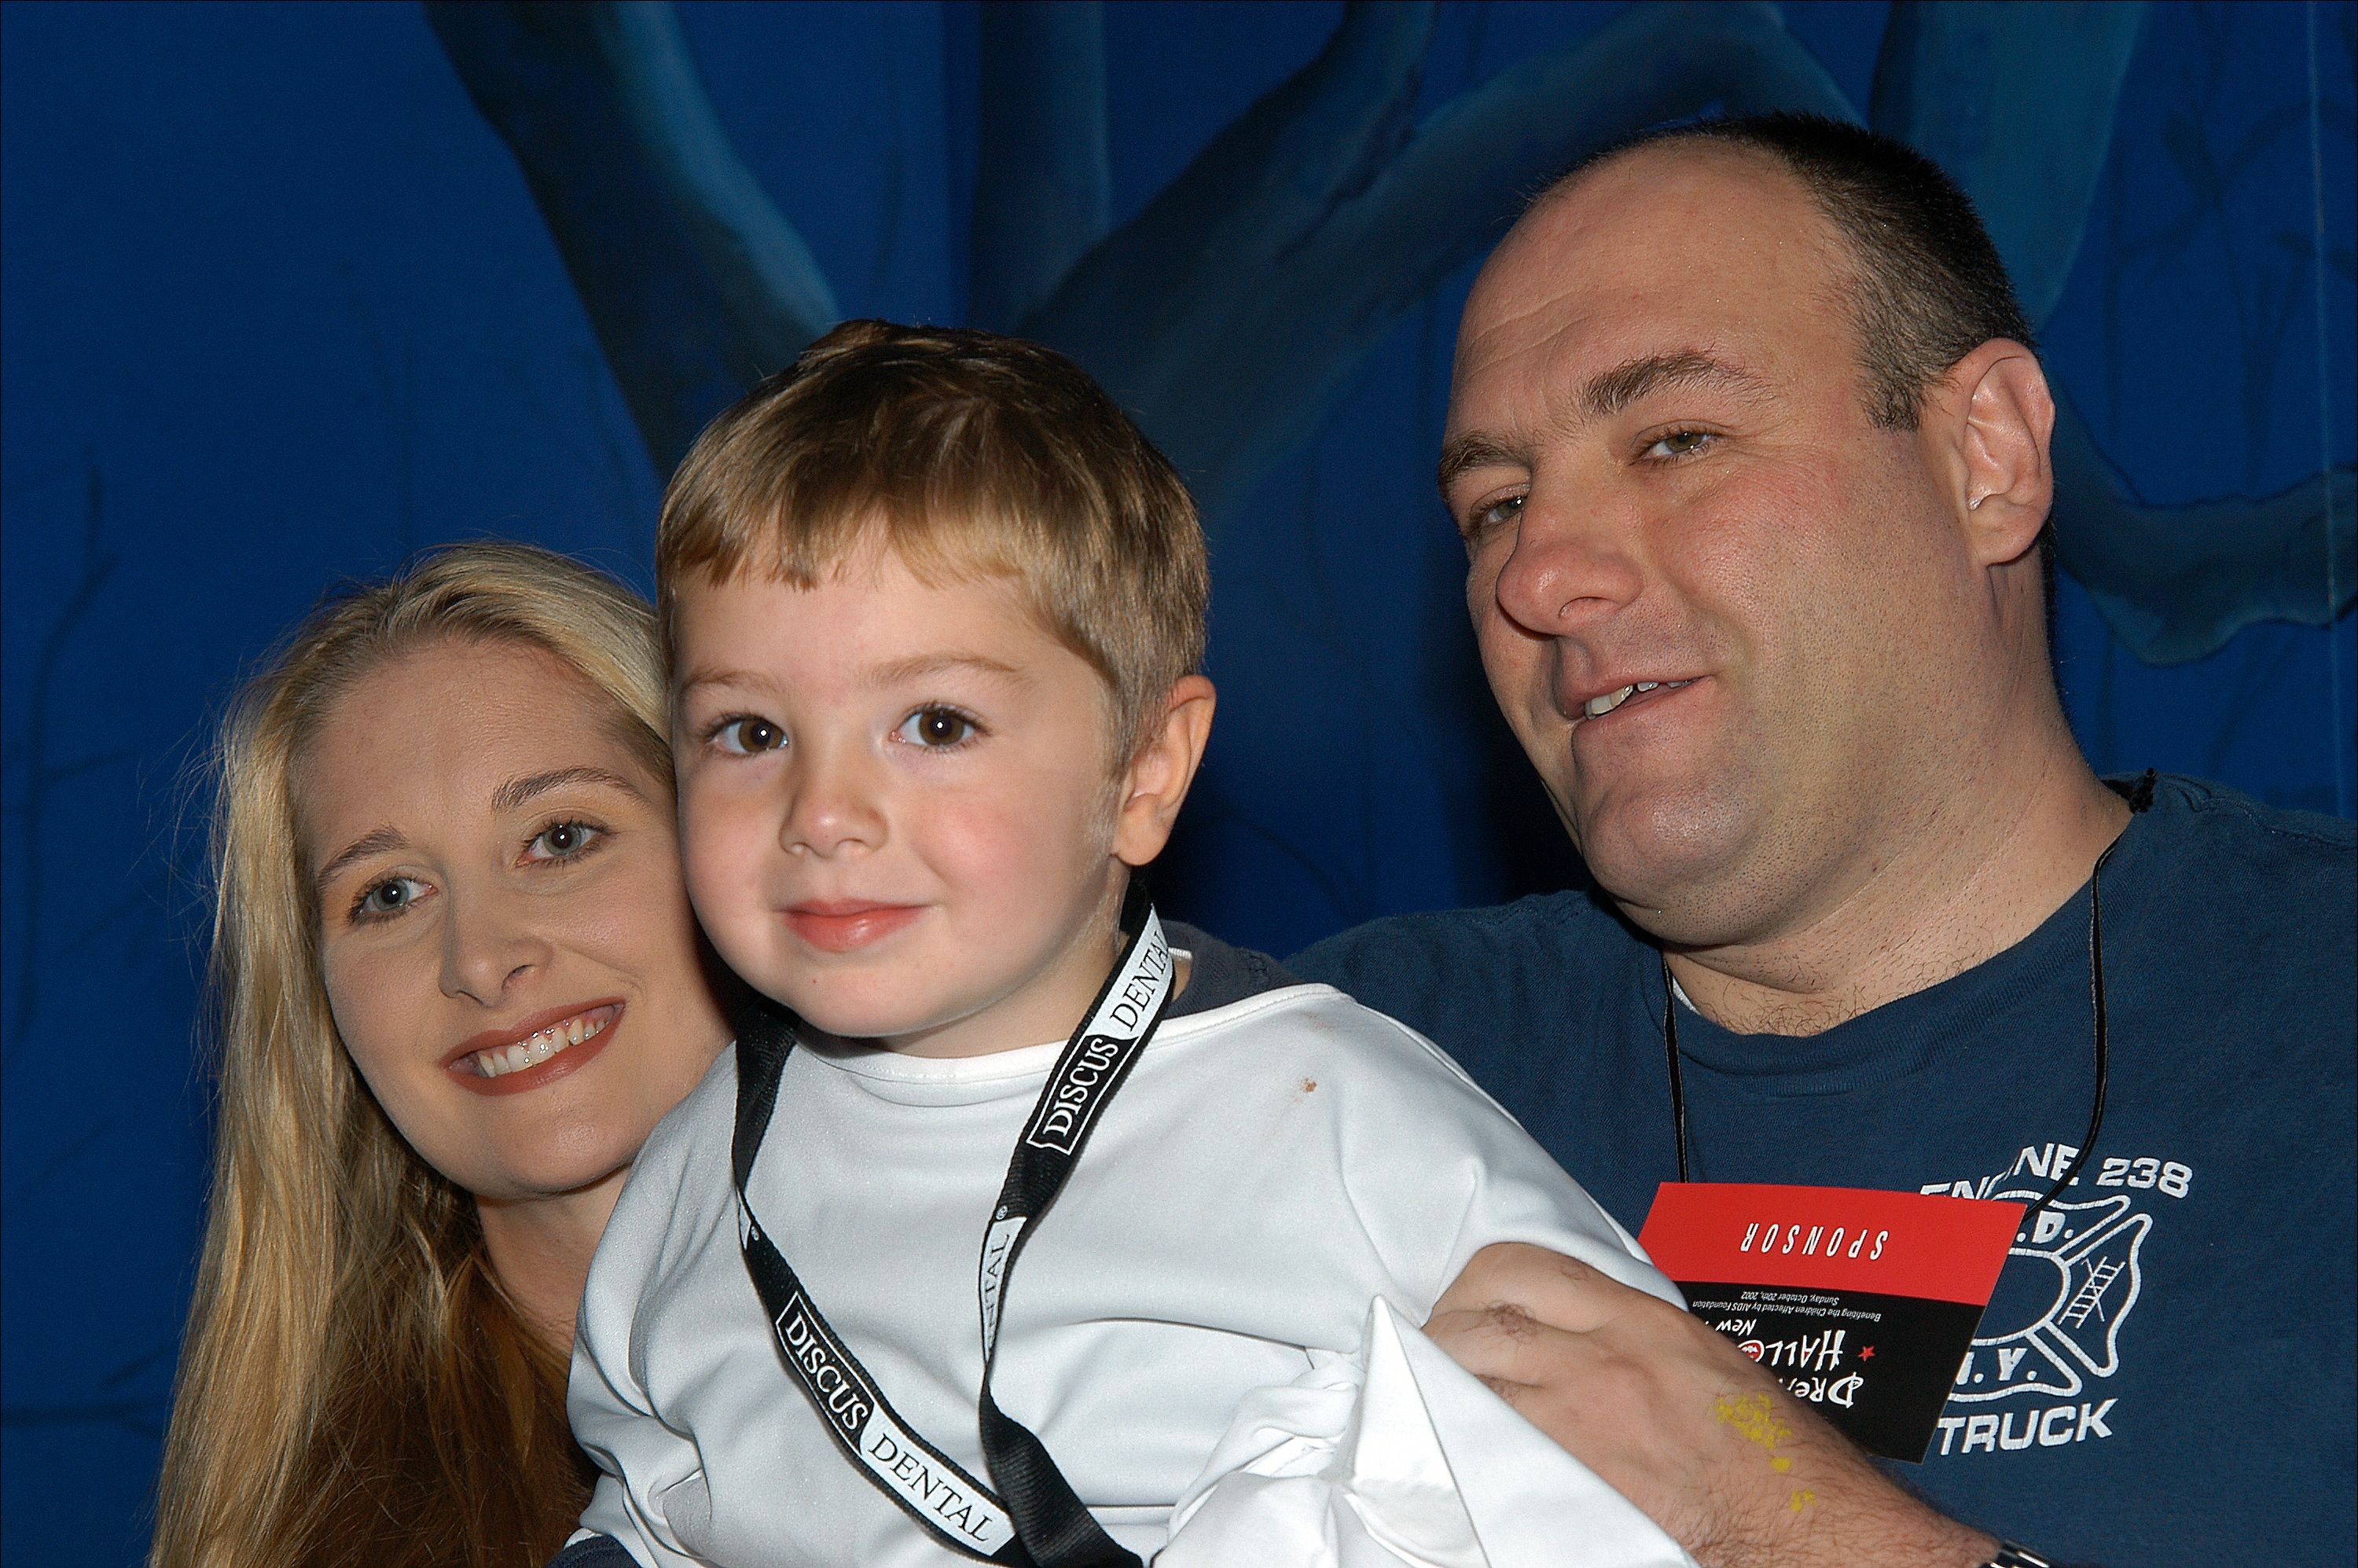 James Gandolfini with his wife, Marcy, and son Michael during Dream Halloween at Chelsea Piers.  The event benefits the Children Affected by AIDS Foundation.  |  Source: Getty Images